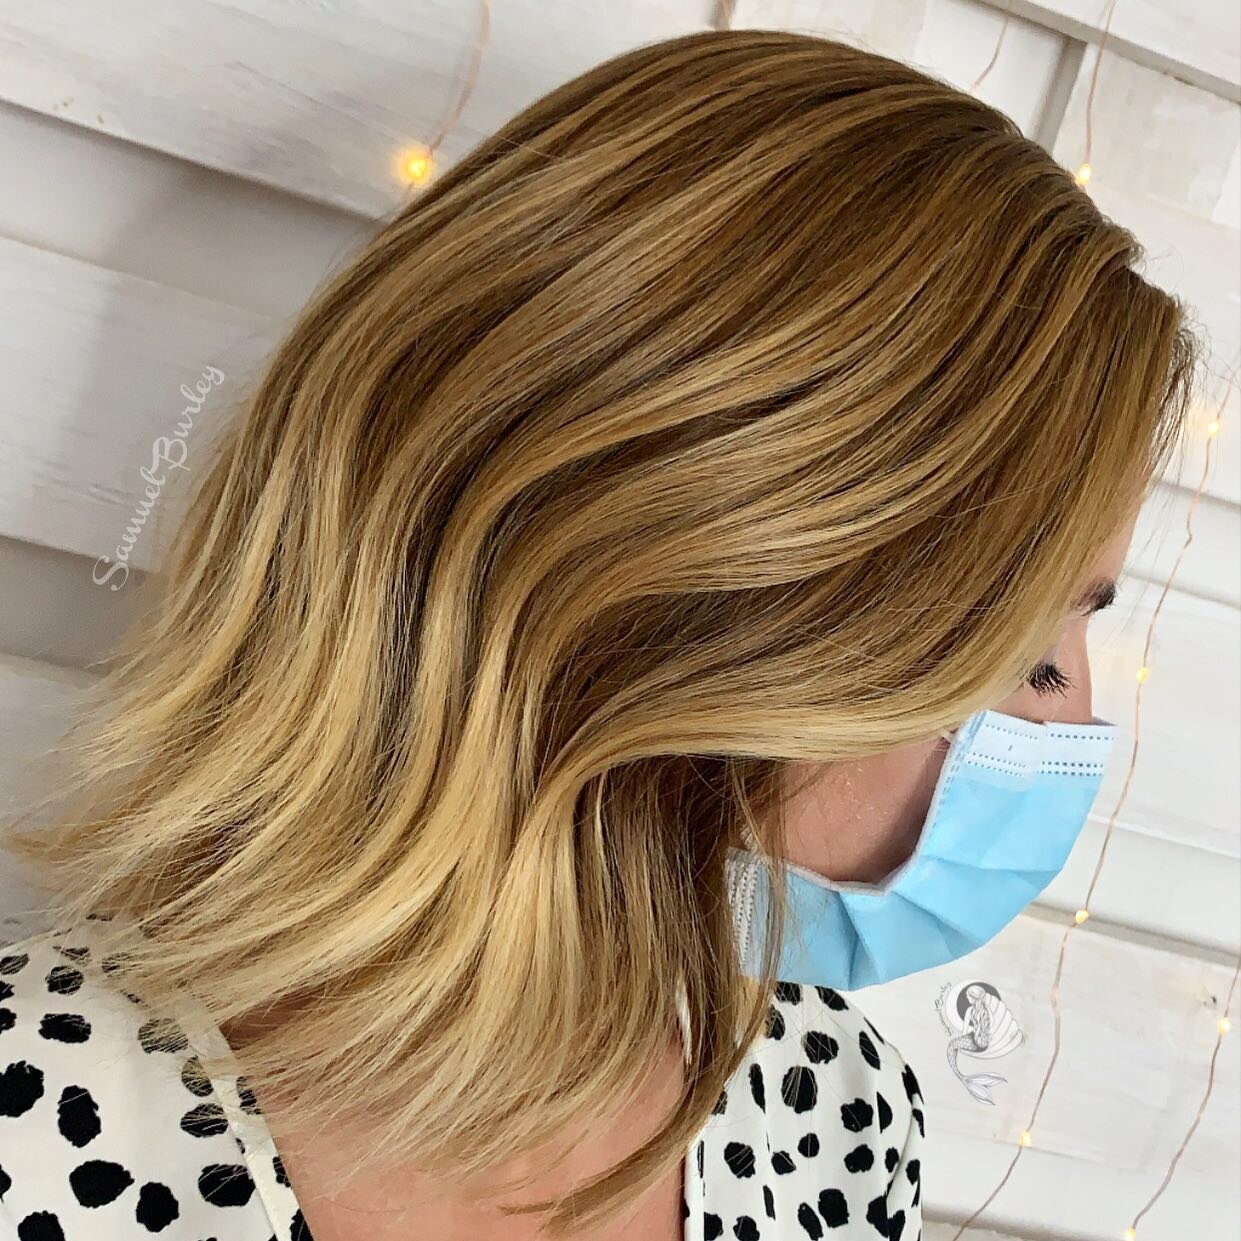 Handpainted balayage is one of my favourite techniques to use when I&rsquo;m working with natural warmth.
Sun kissed caramels and honey blonde ribbons serving some serious Californian bronde vibes.